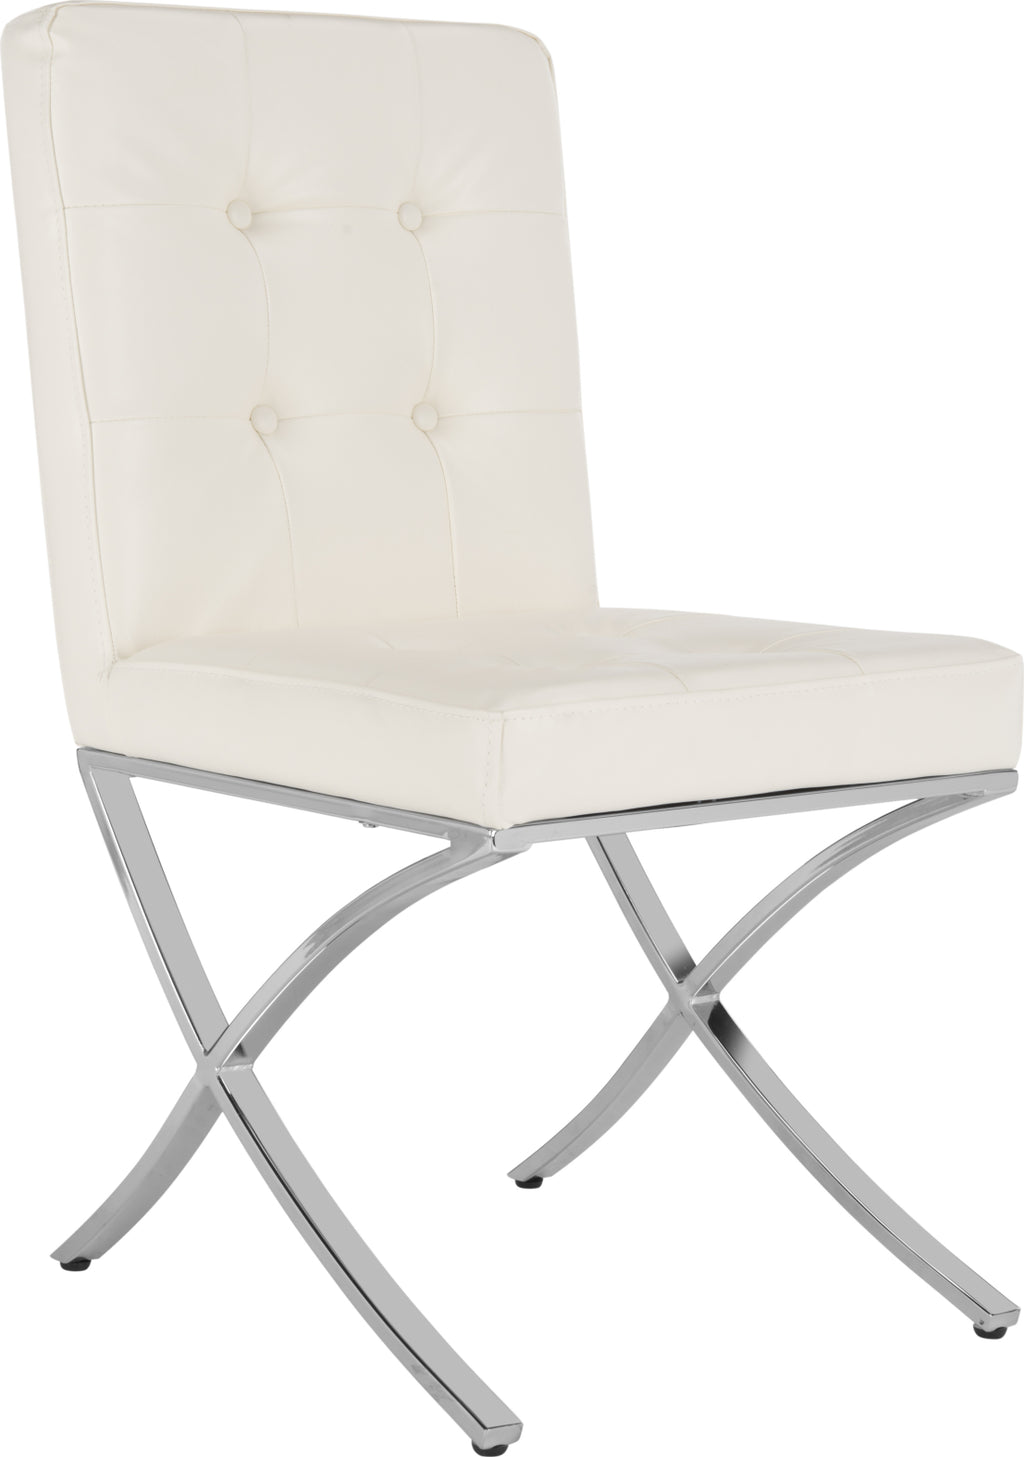 Safavieh Walsh Tufted Side Chair White and Chrome  Feature